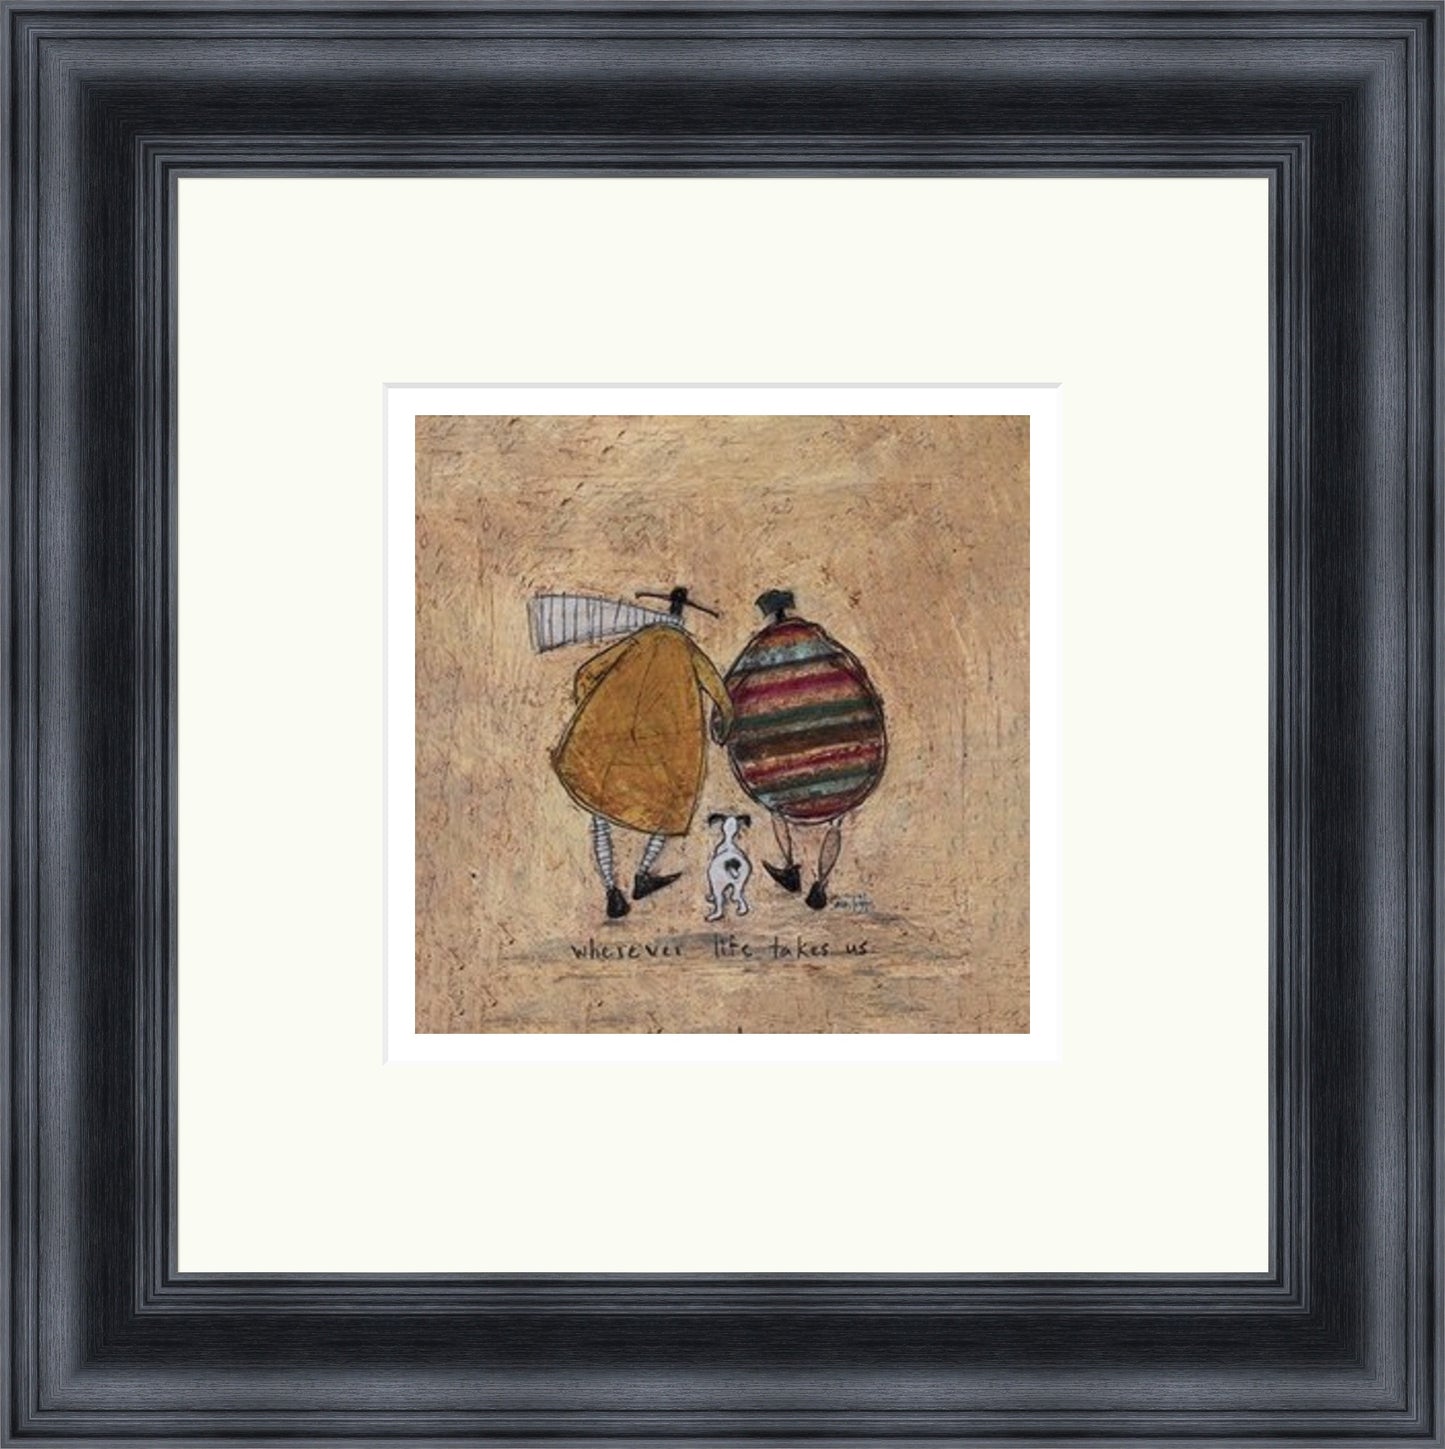 Wherever Life Takes Us by Sam Toft